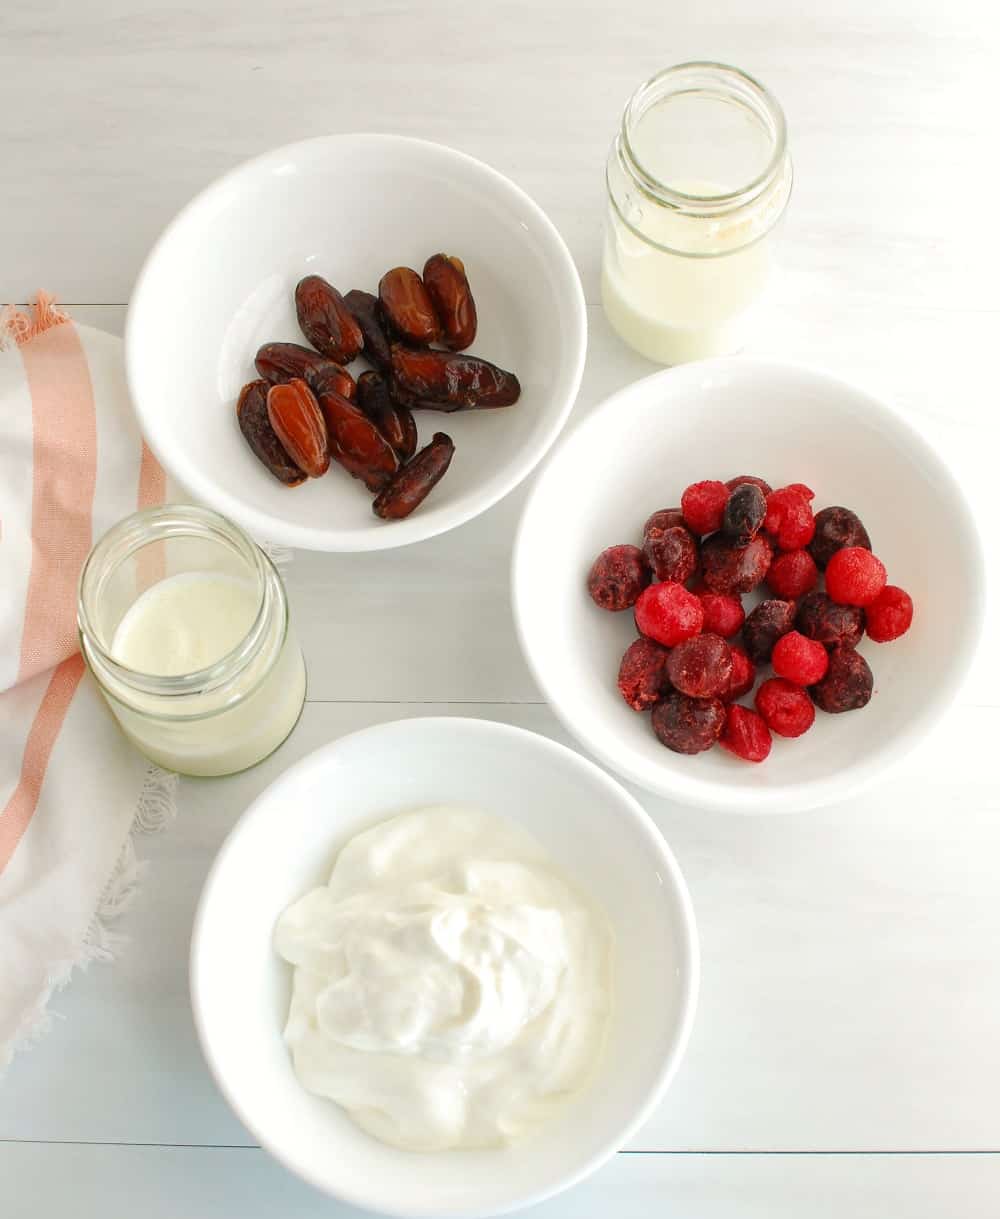 A bowl of cherries, greek yogurt, and dates, next to glasses of milk and cream